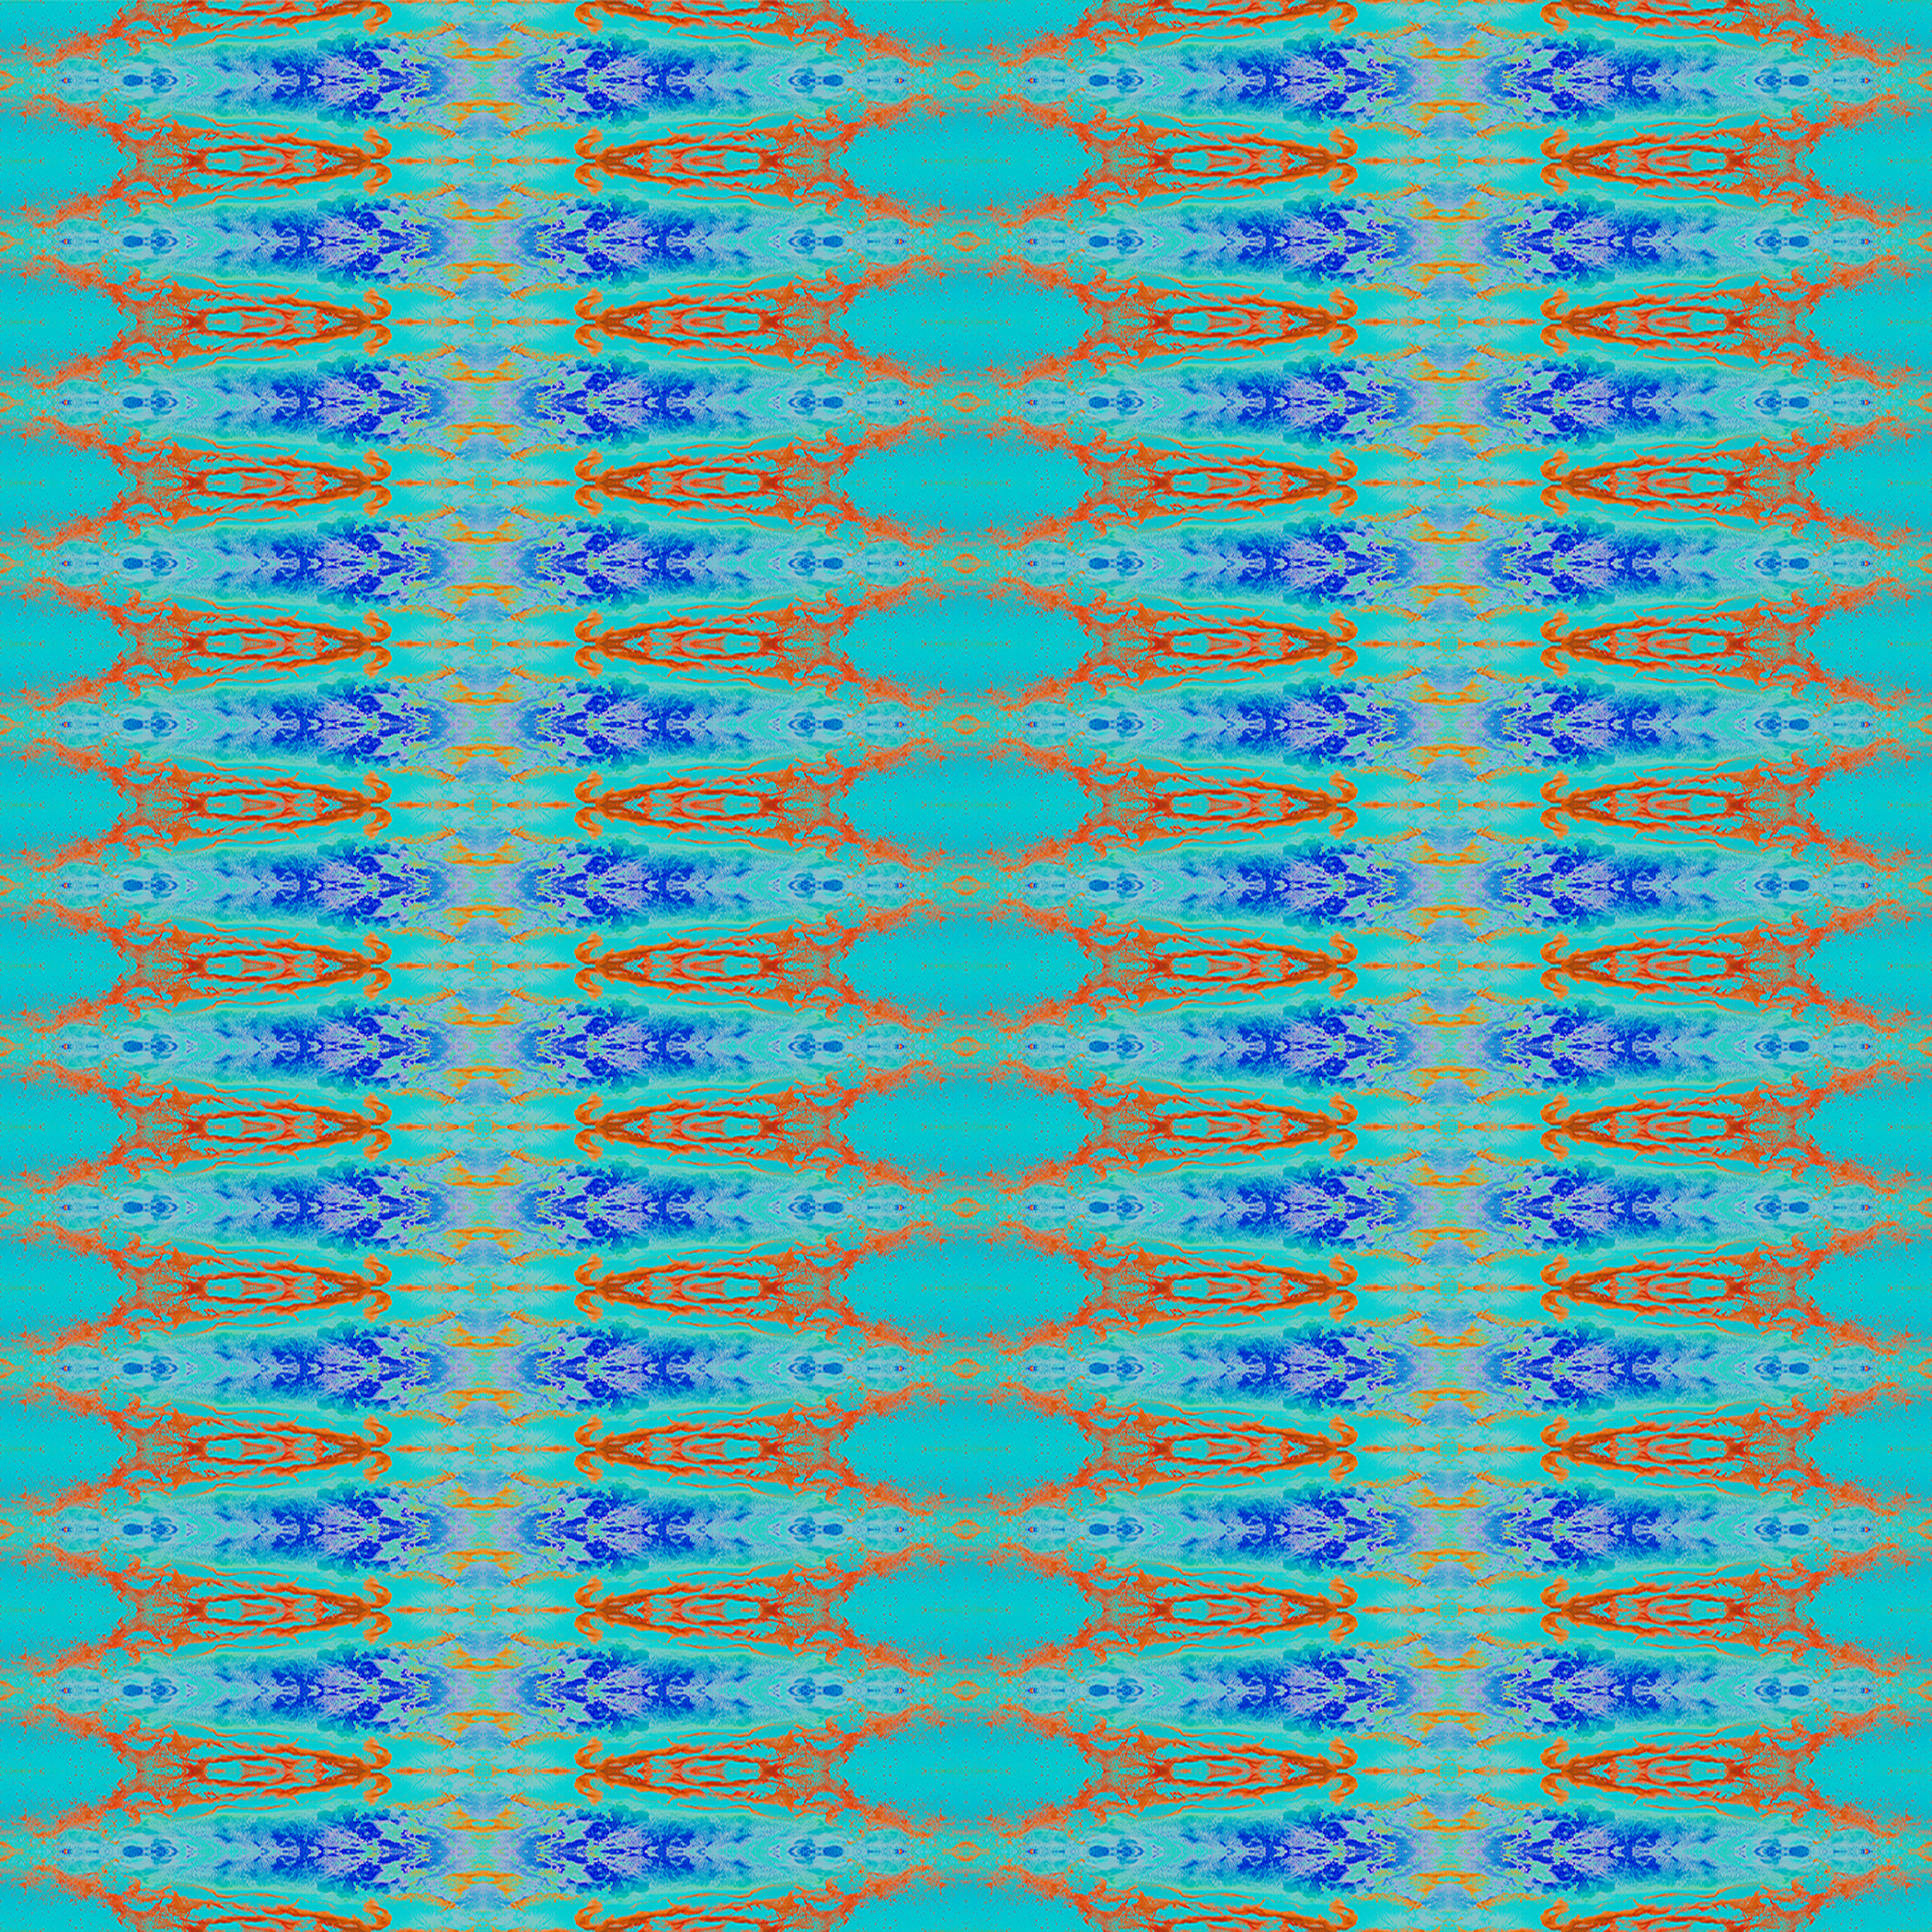 Seamless, repeating pattern created from photos of very small beach break. The actual waves were only inches high when photographed.